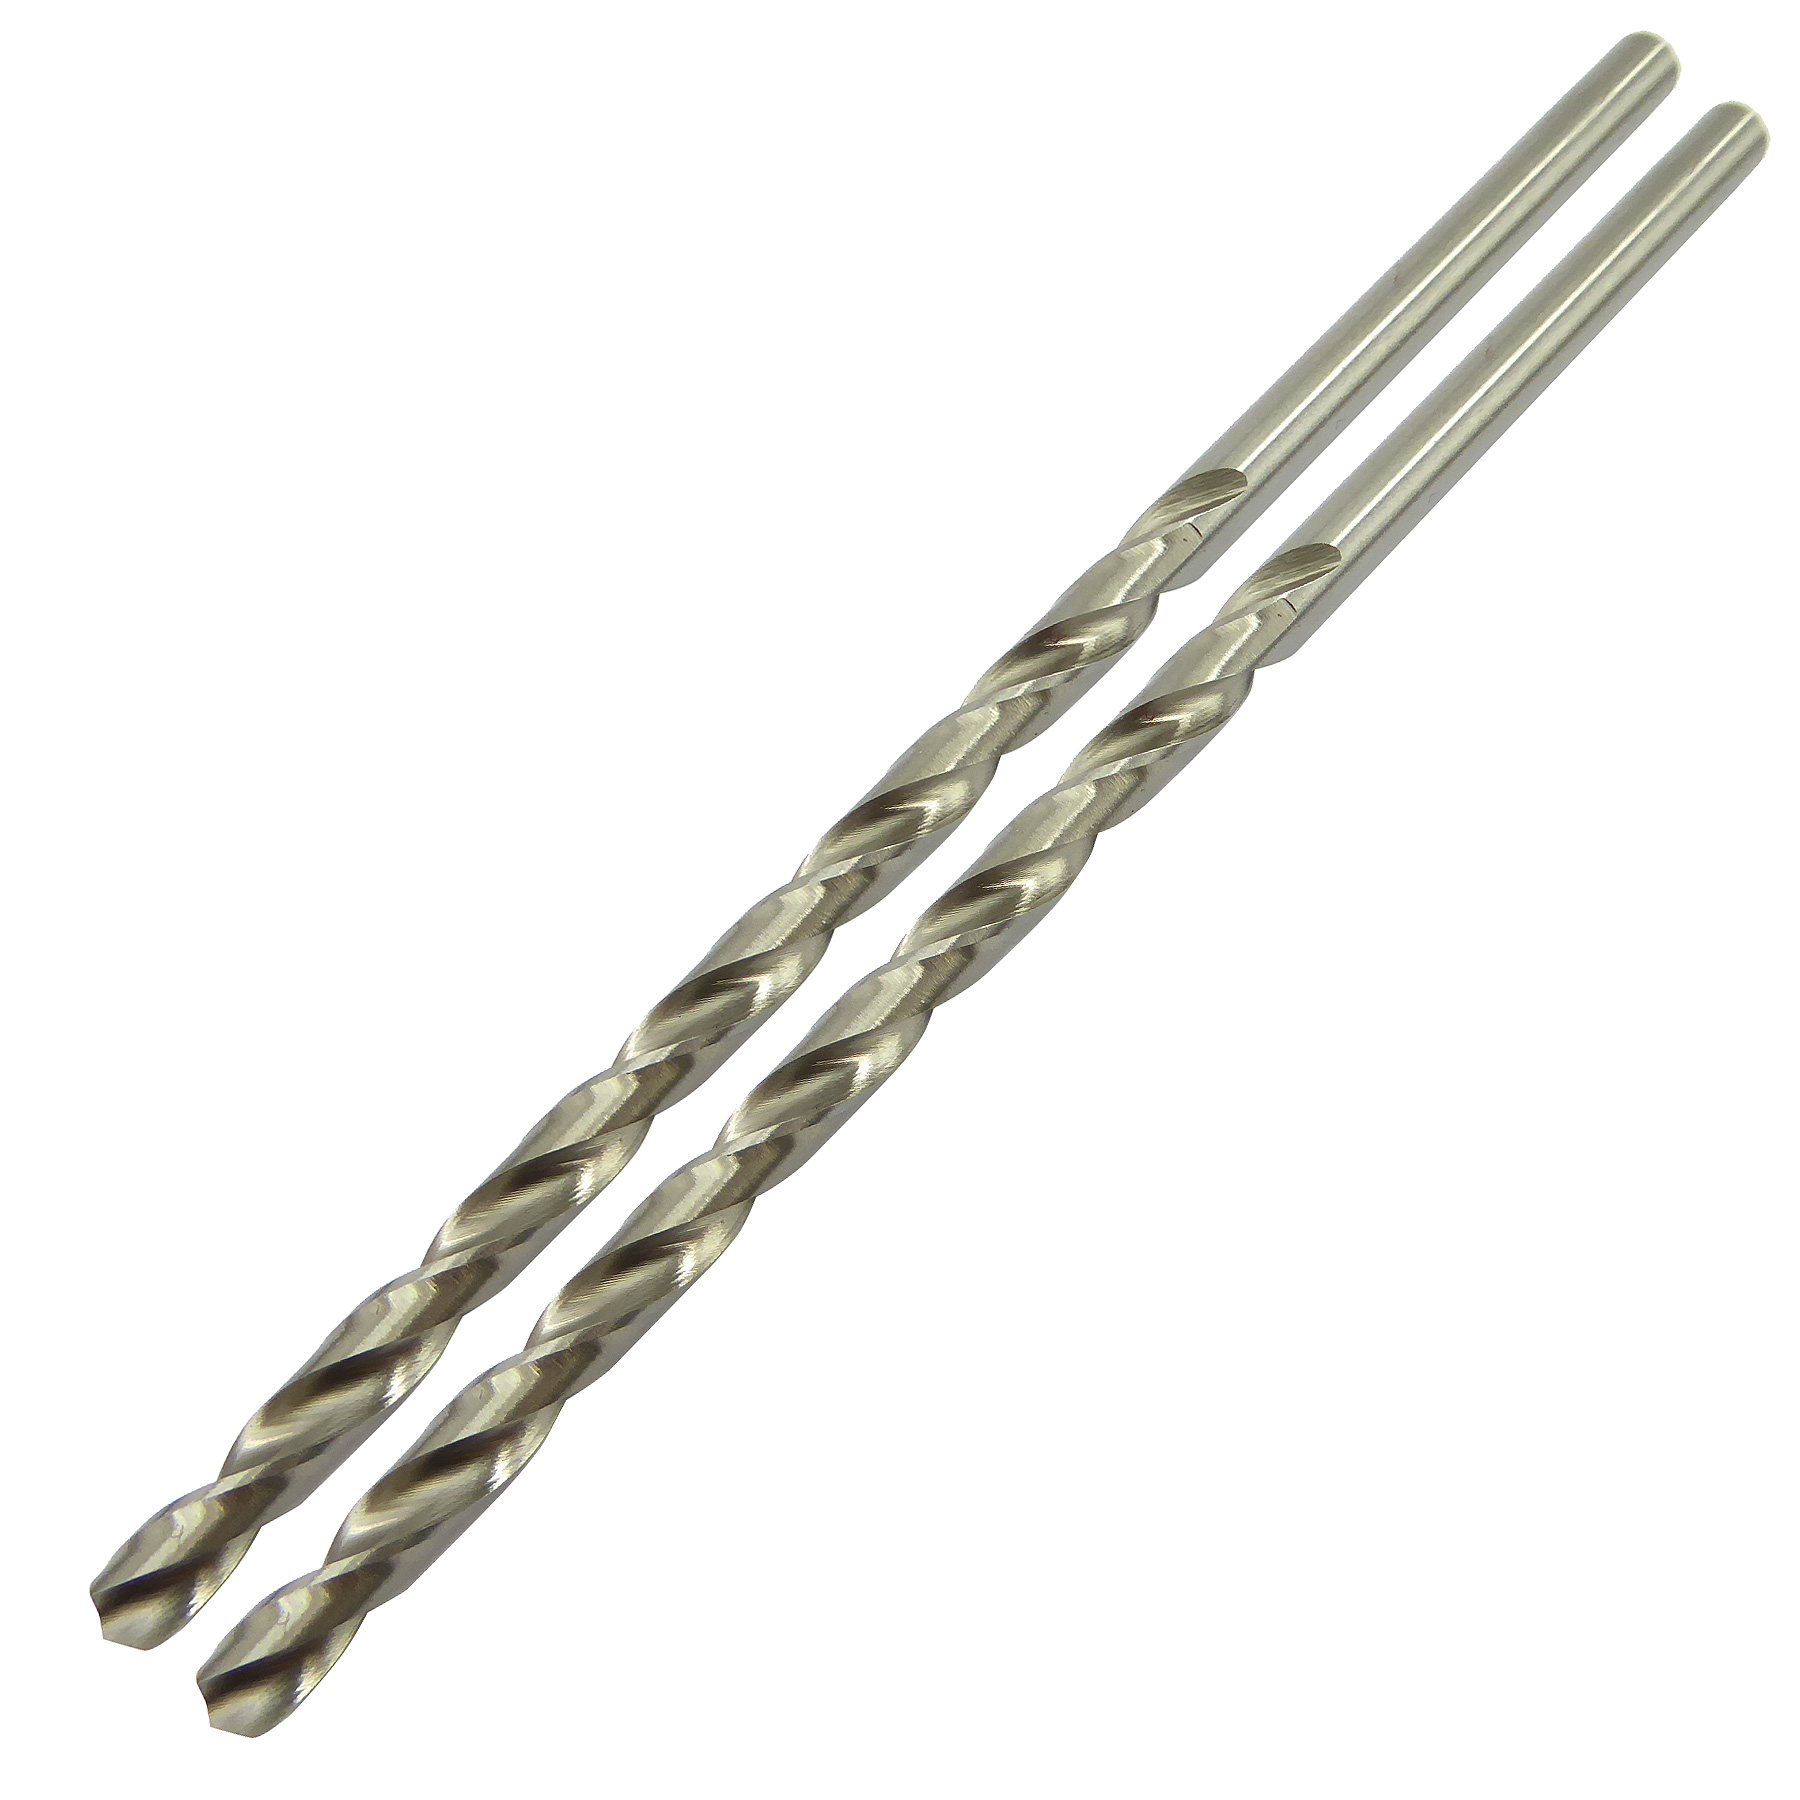 5.0mm x 132mm Long Series Ground Twist Drill Pack of 2